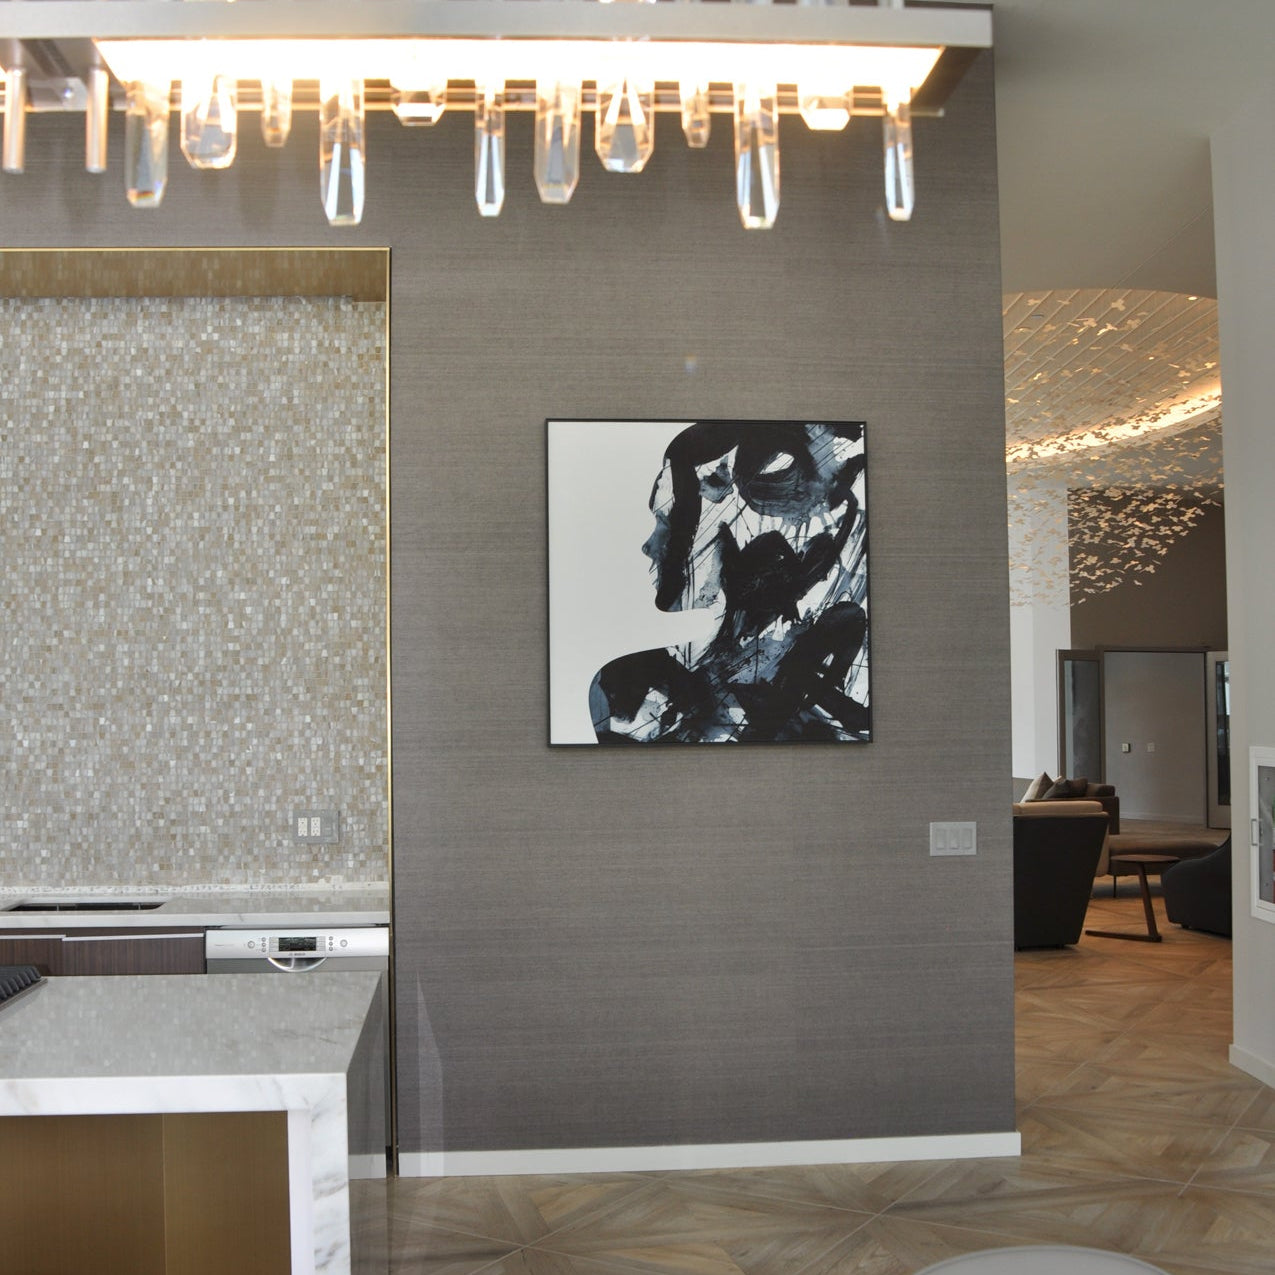 Chic amenity space in 465 North Park showcasing a WRAPPED Studio abstract canvas with dynamic black strokes, enhancing the curated living experience.